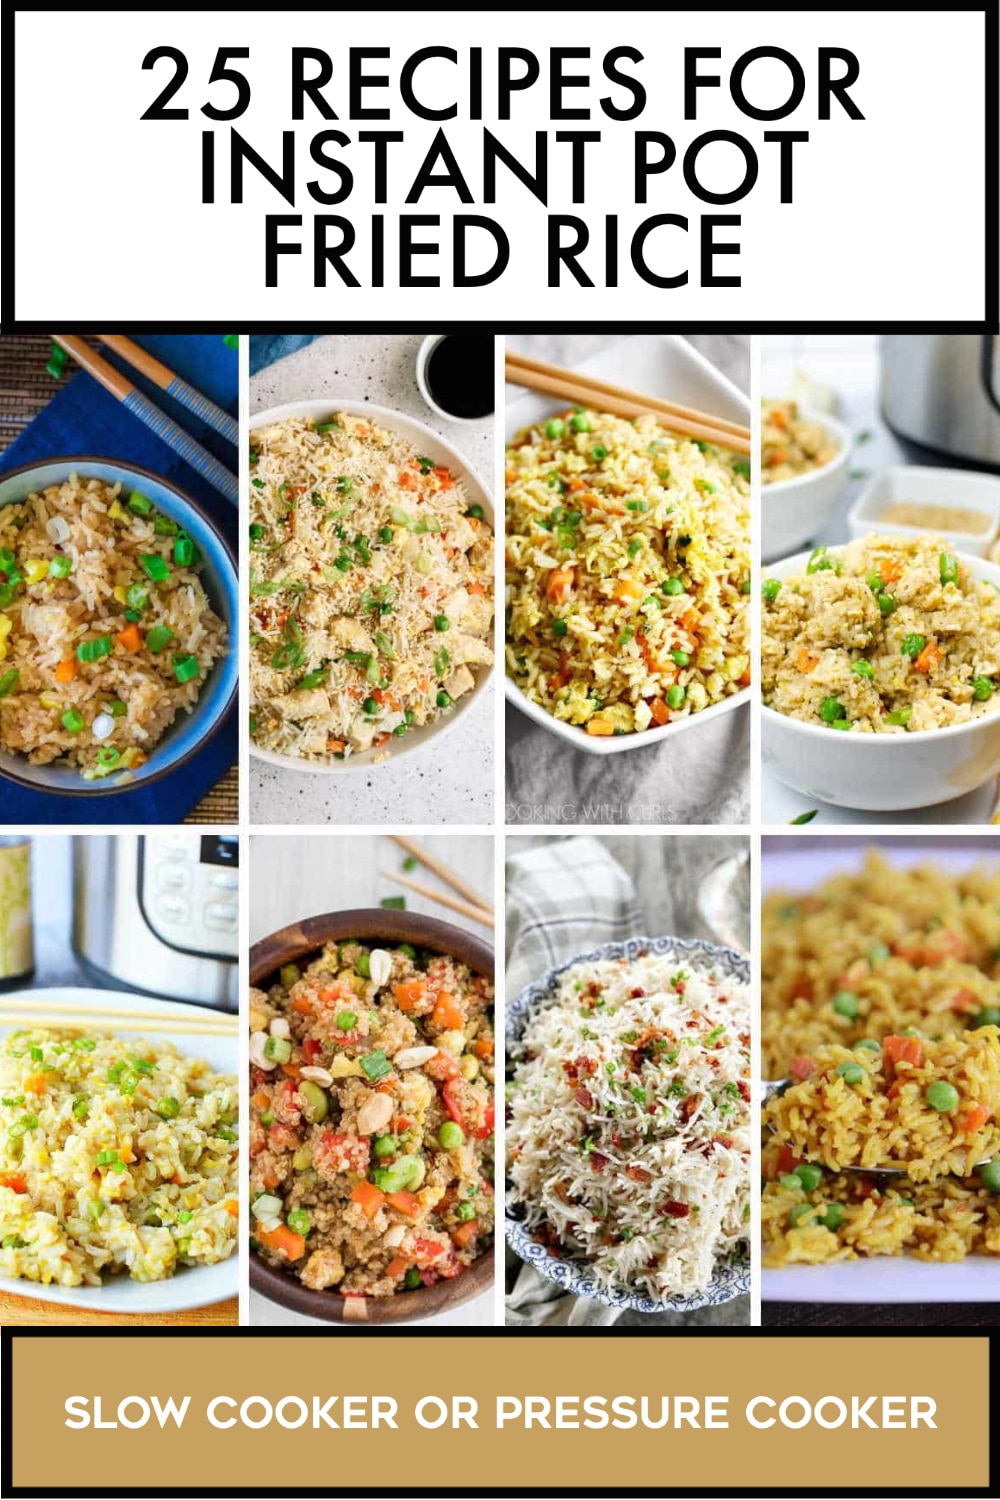 Pinterest image of 25 Recipes for Instant Pot Fried Rice